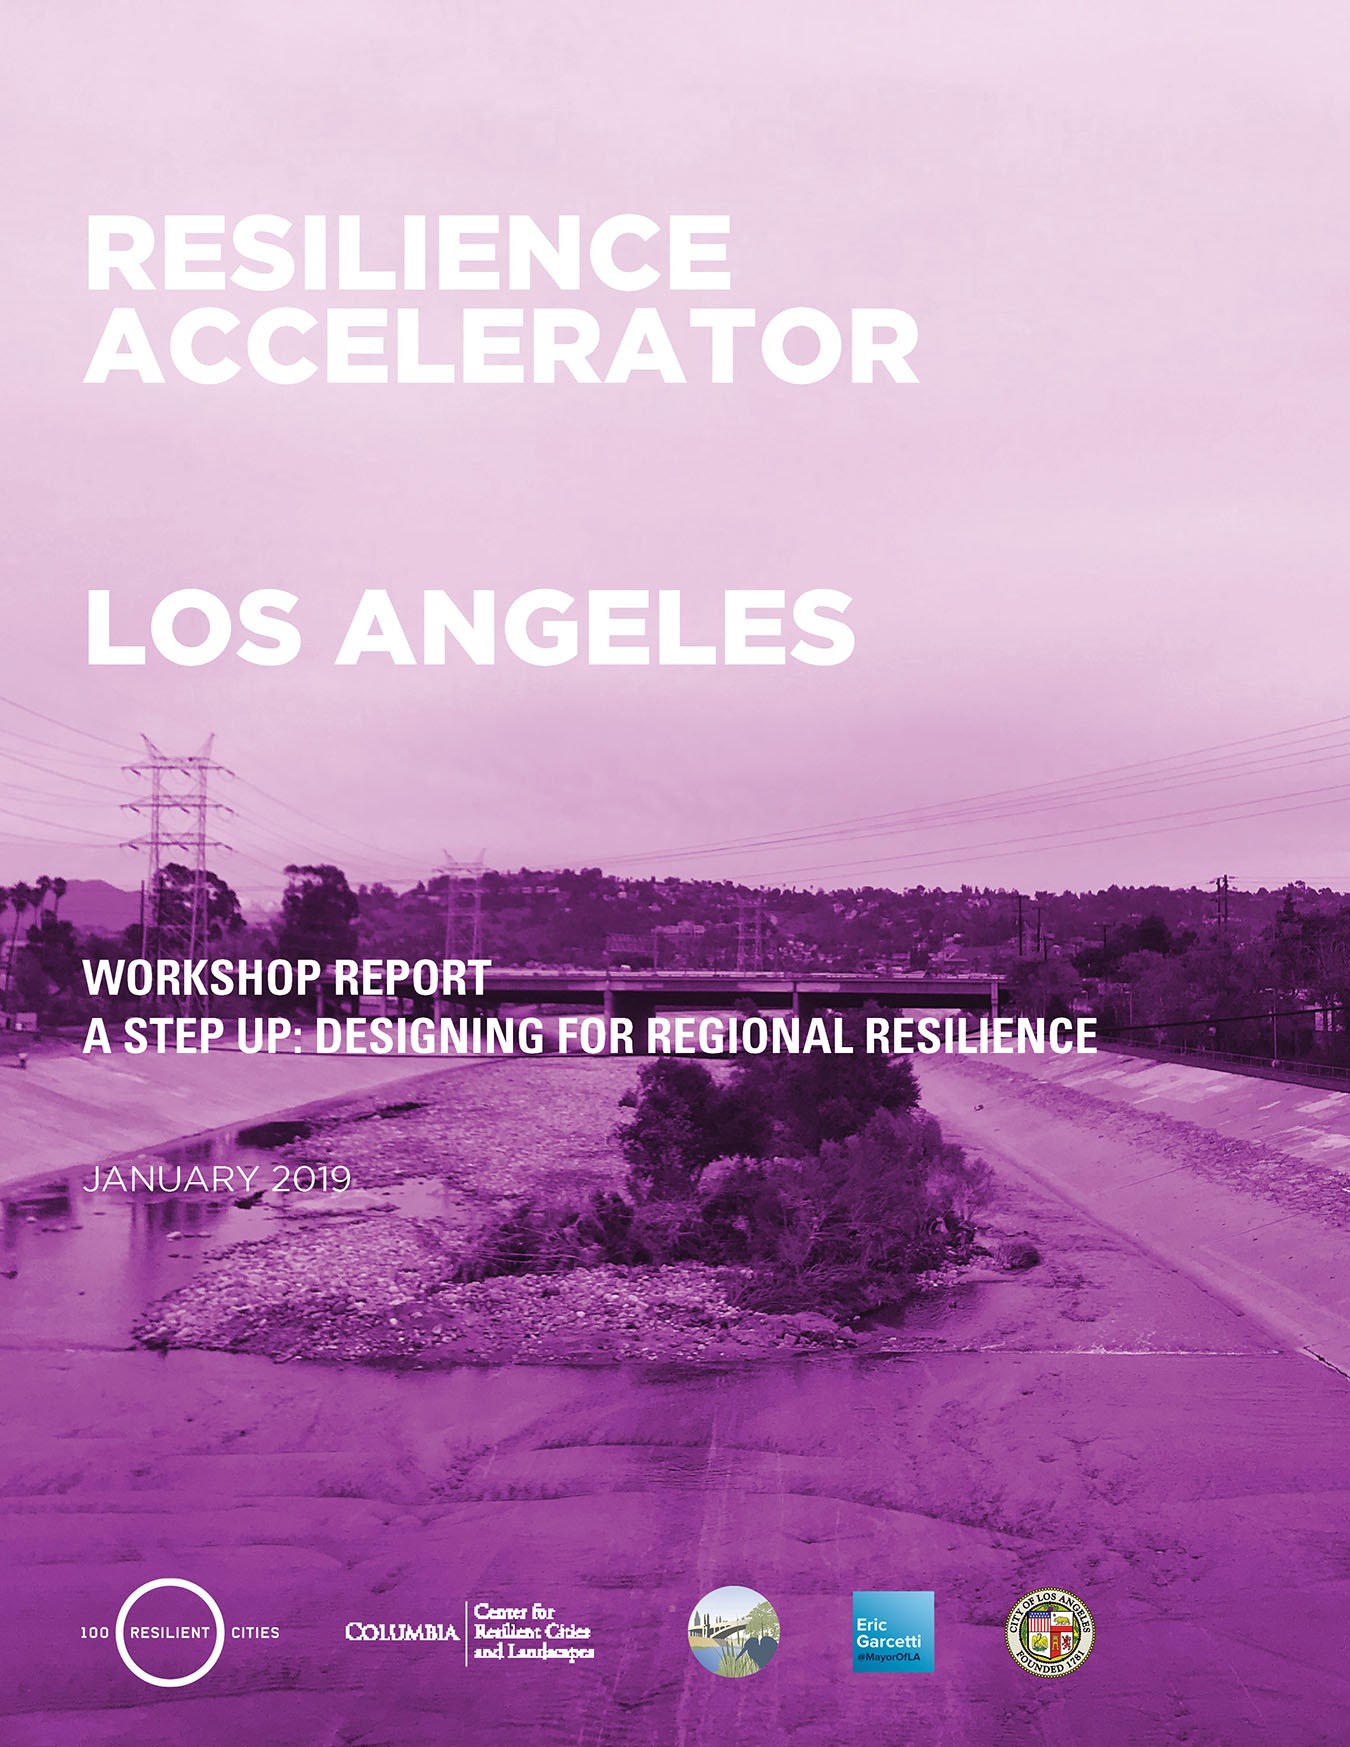 Los Angeles River Resilience Accelerator Workshop Report